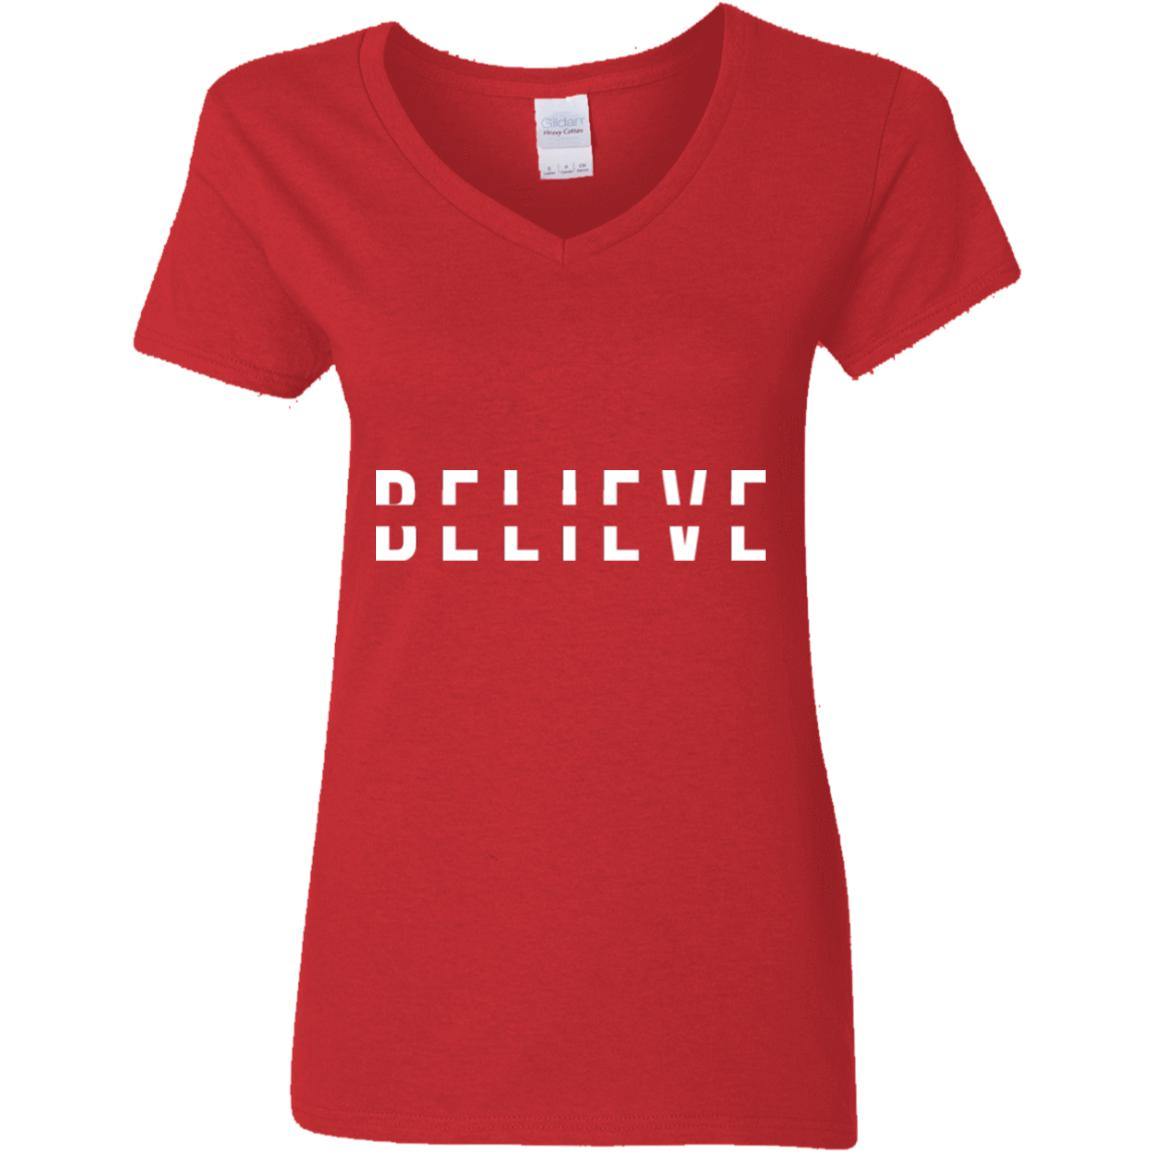 BELIEVE Ladies' V-Neck T-Shirt - Wear What Inspires You